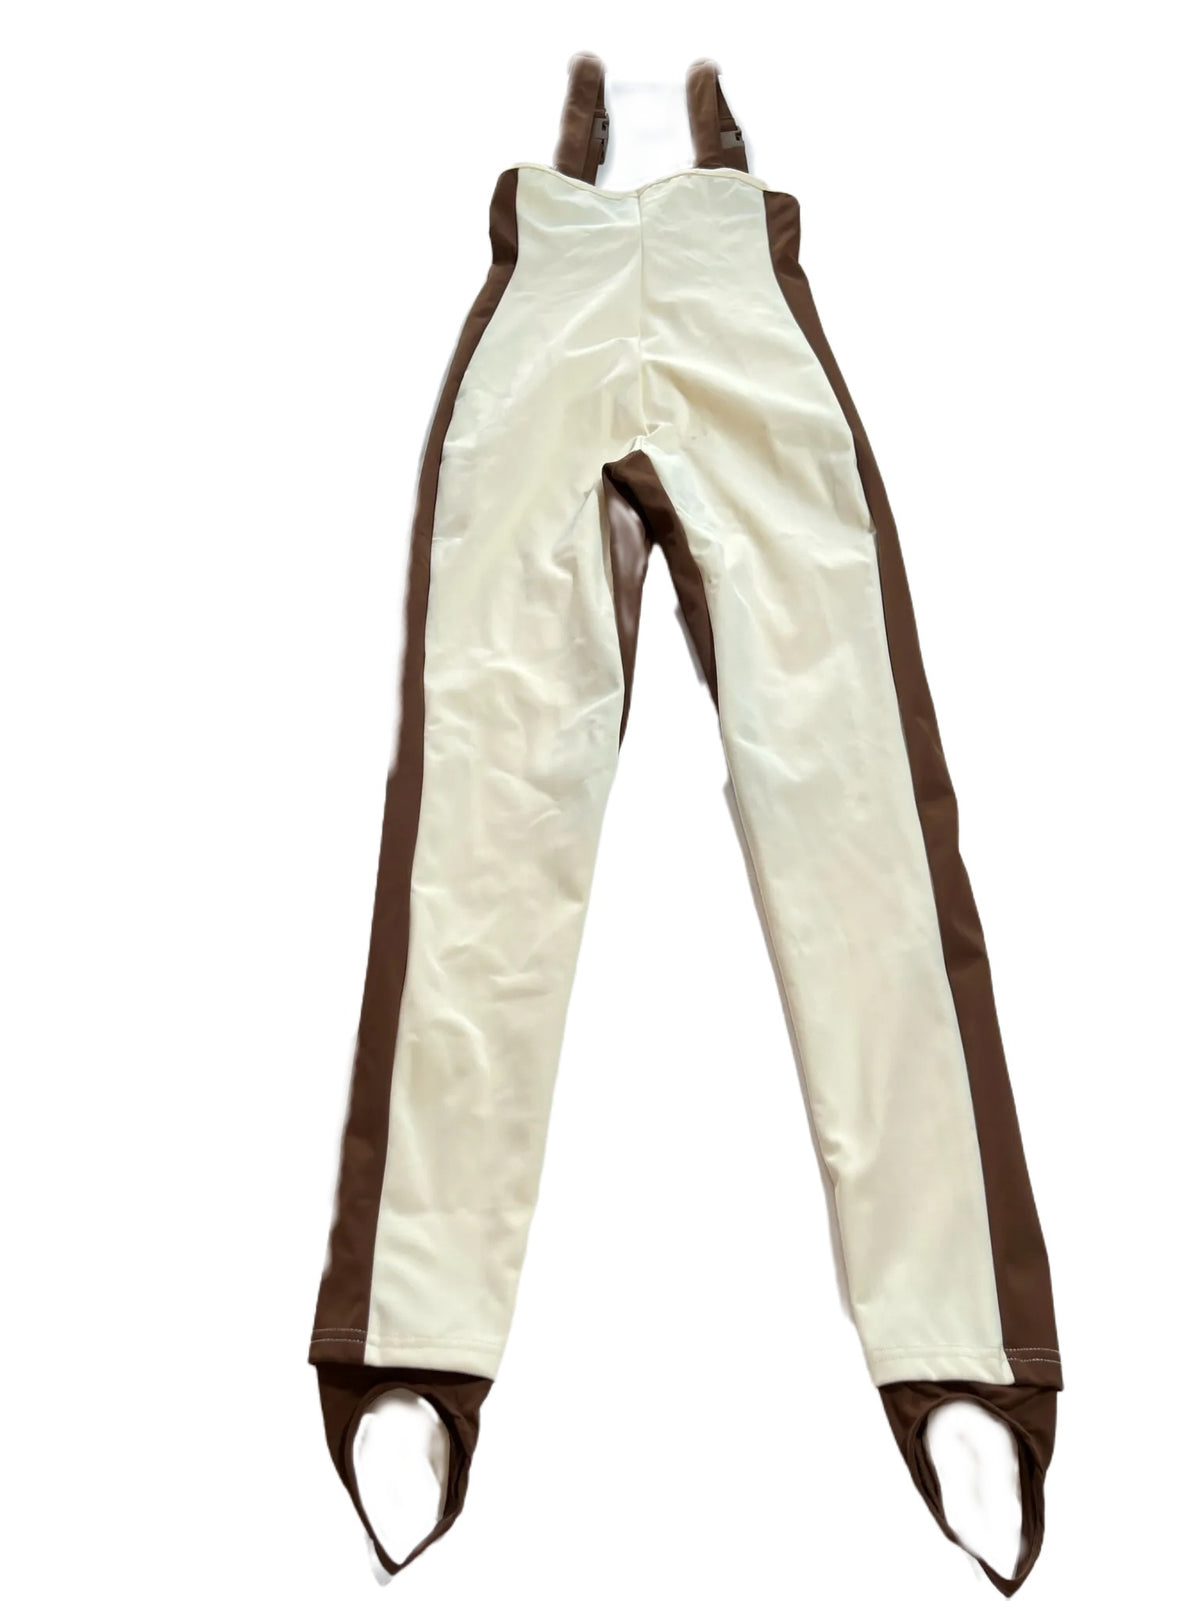 Pretty Little Thing- Cream and Brown Ski Suit NEW WITH TAGS!